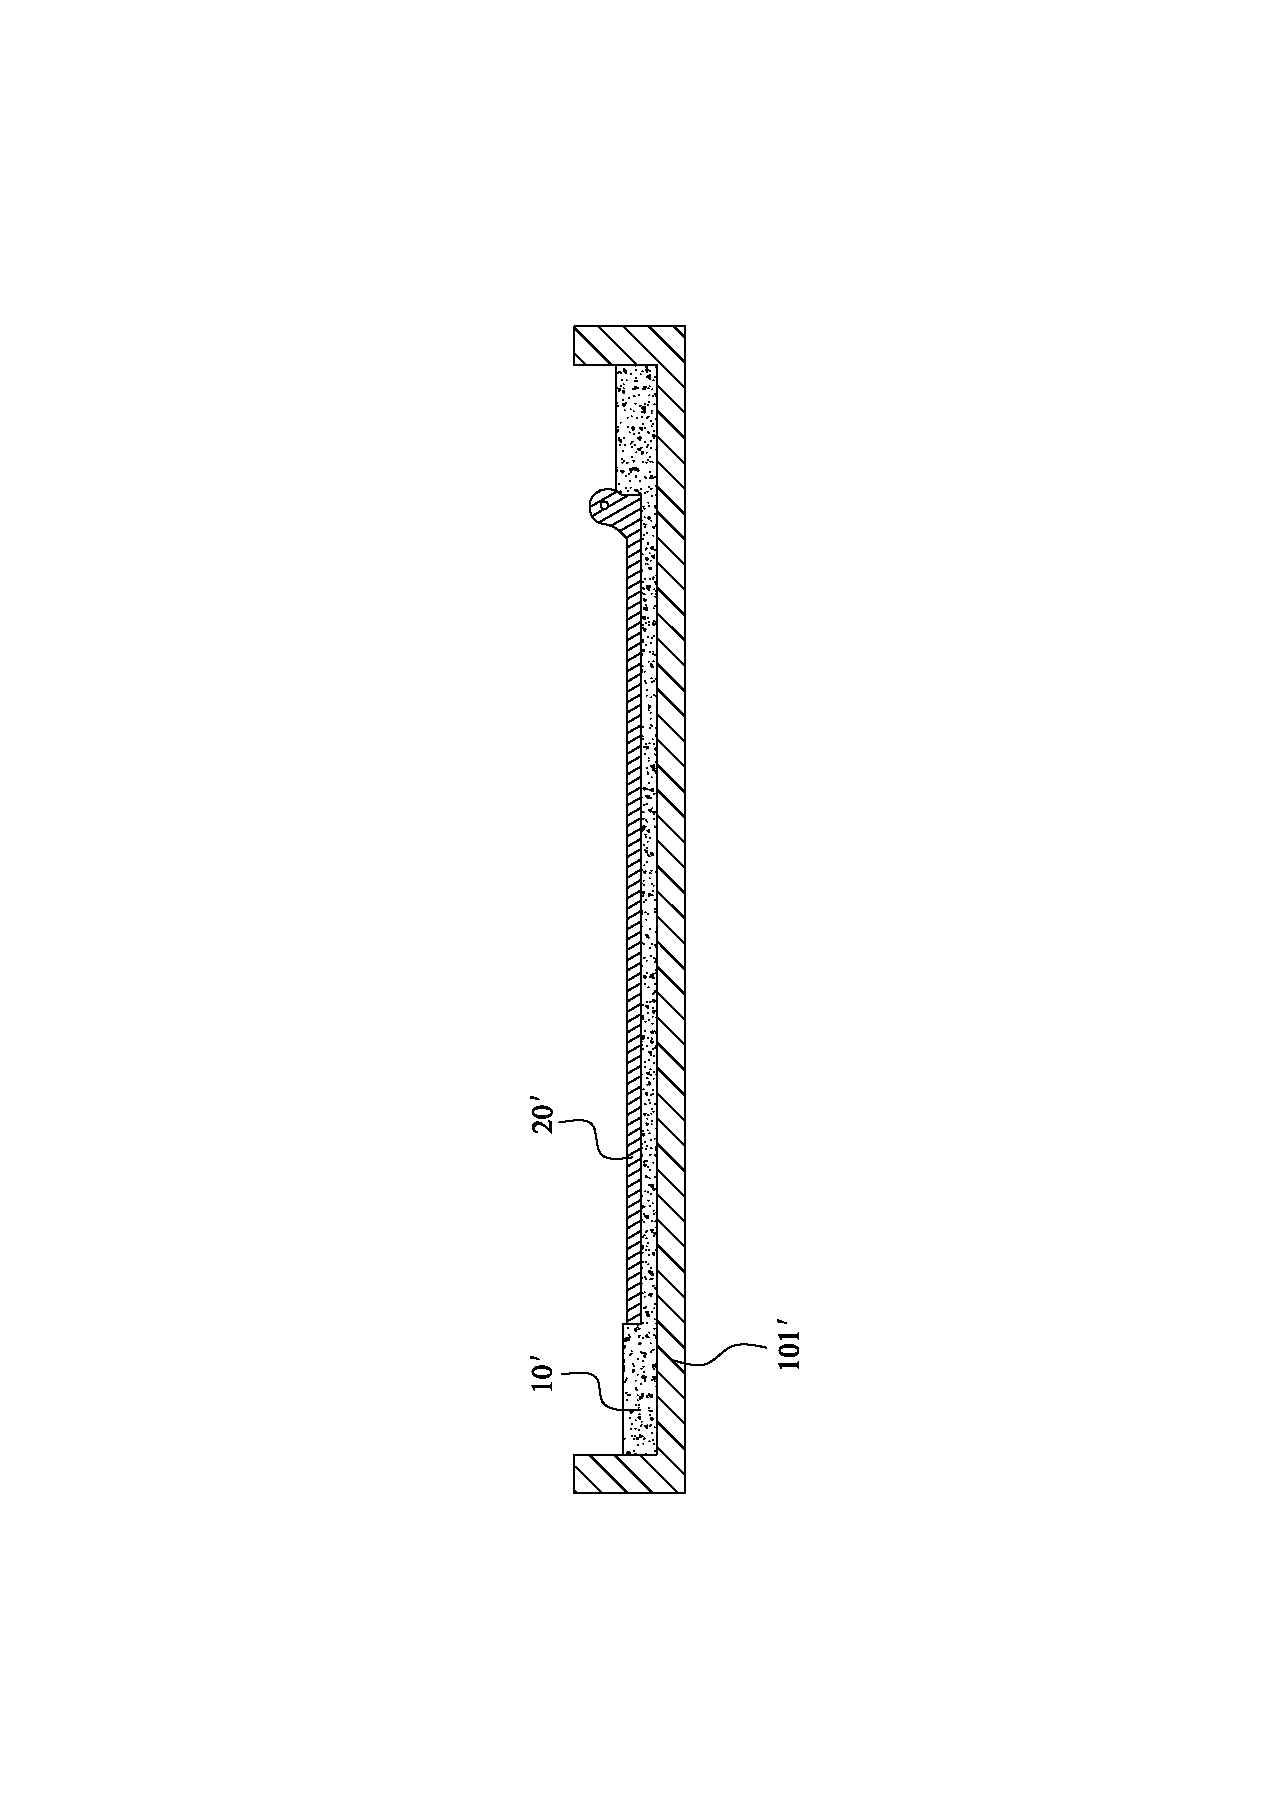 Earpiece moulding method by implanting plastic into metal fittings